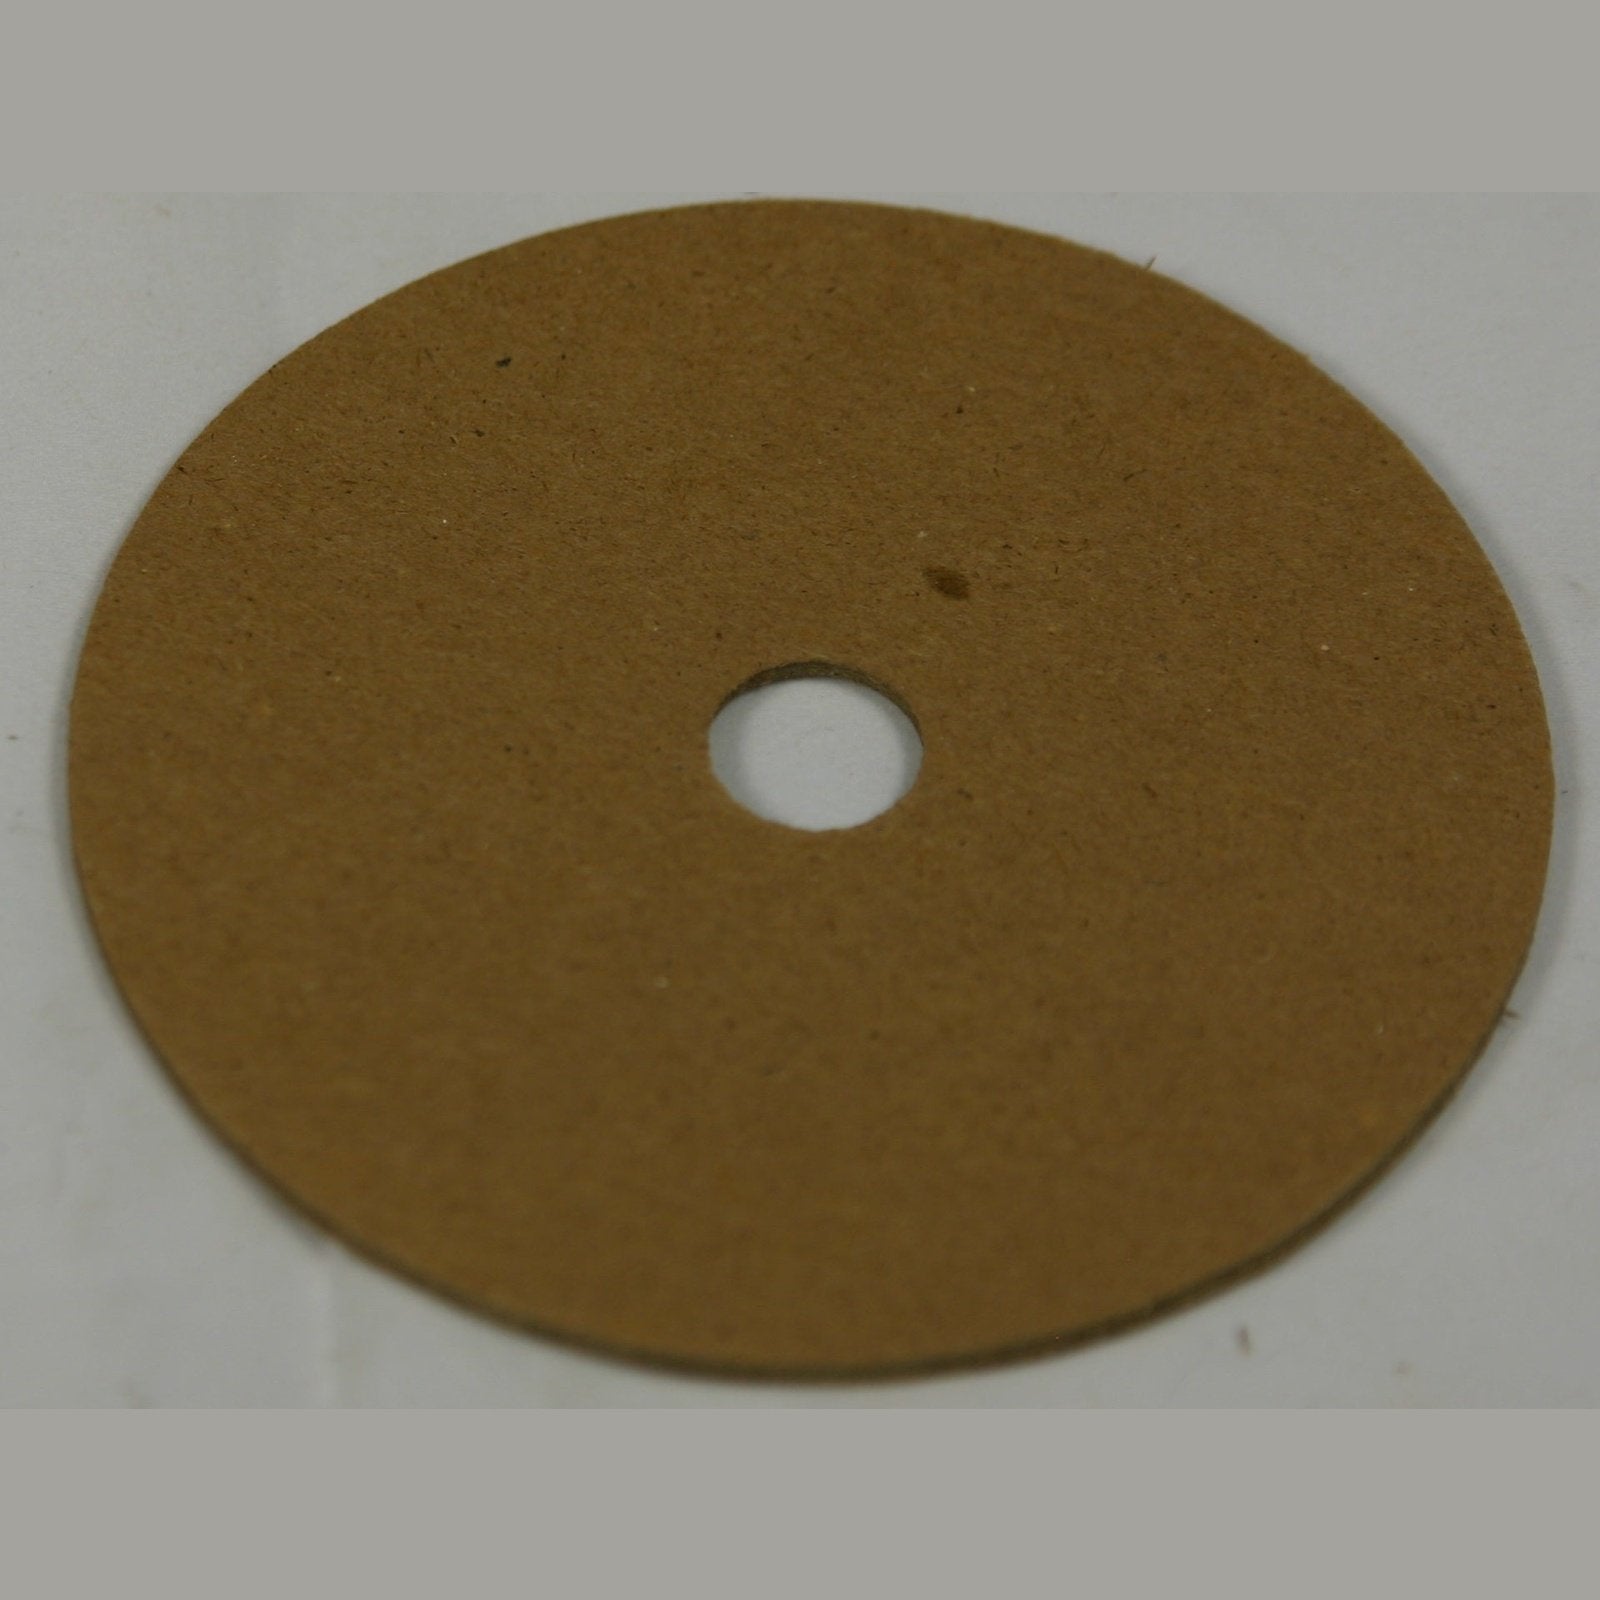 10pc 4 1/4" Paper Disc with 5/8" hole